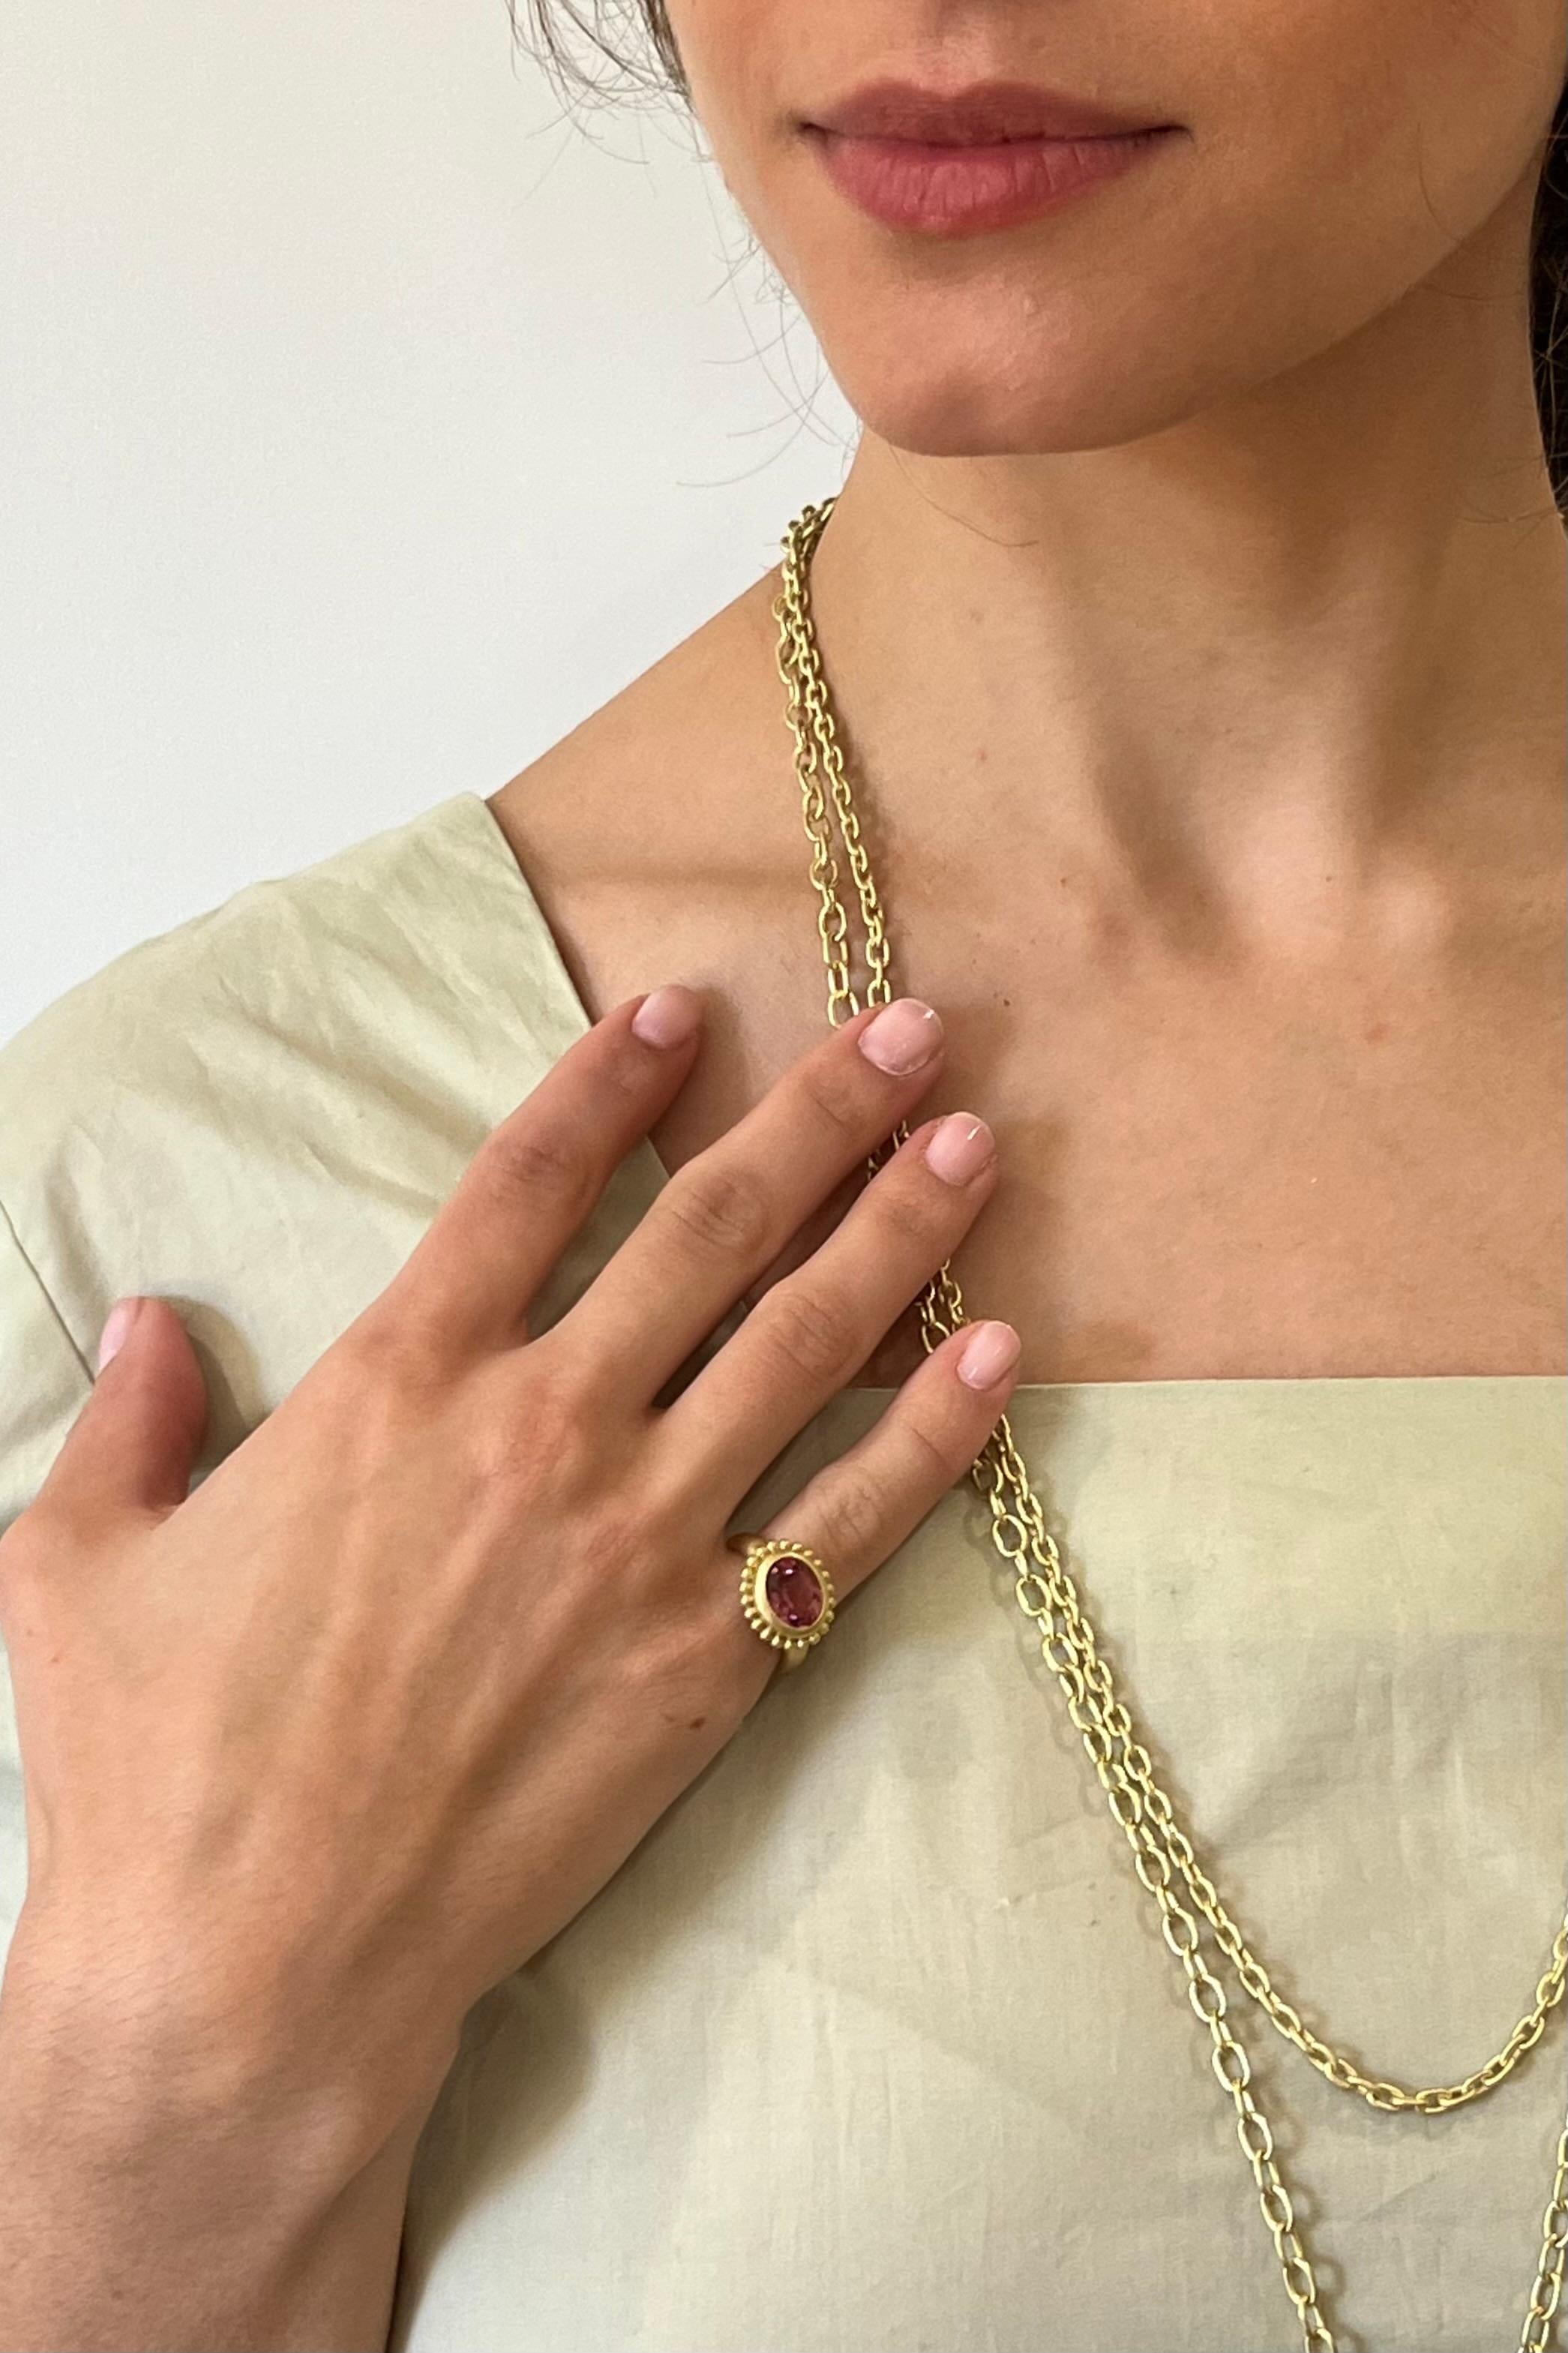 Classic and versatile, Faye Kim's 18 Karat Gold Heavy Small Oval Link Chain, handmade with a matte finish, is a must-have for every jewelry wardrobe. This beautiful piece has heft and can be worn alone or as a layering piece with other chains and/or